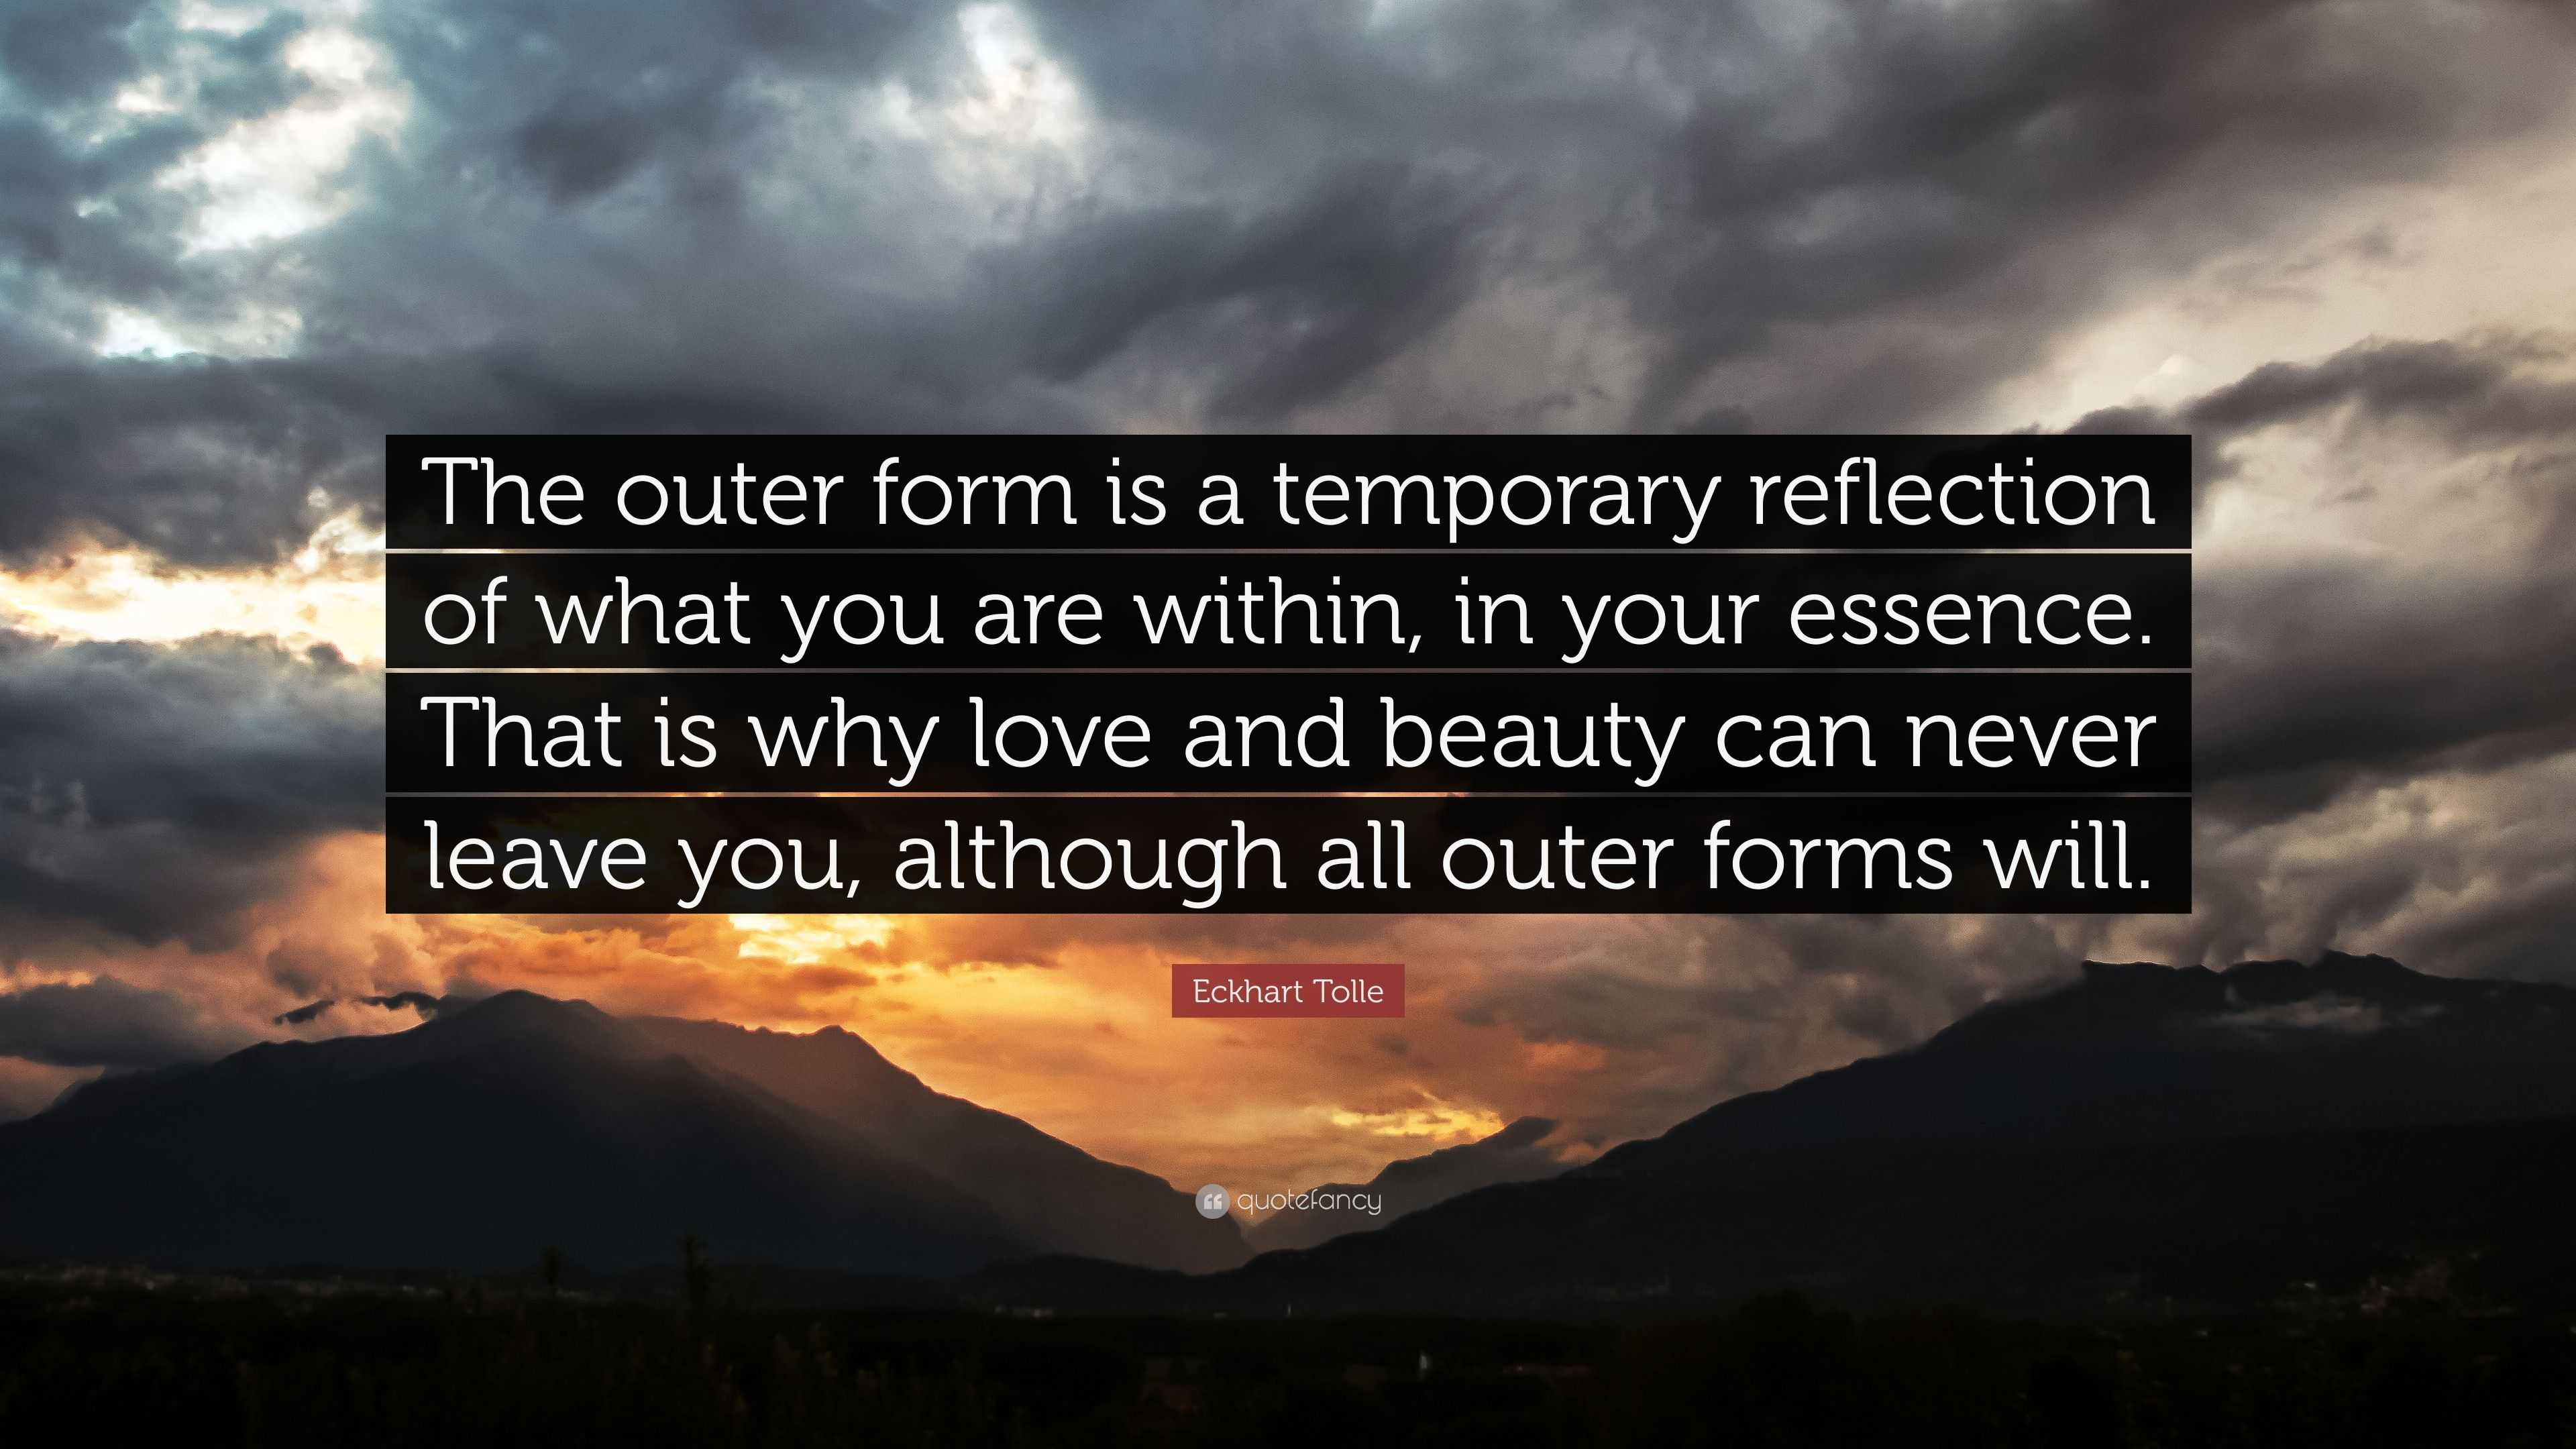 Eckhart Tolle Quote “The outer form is a temporary reflection of what you are